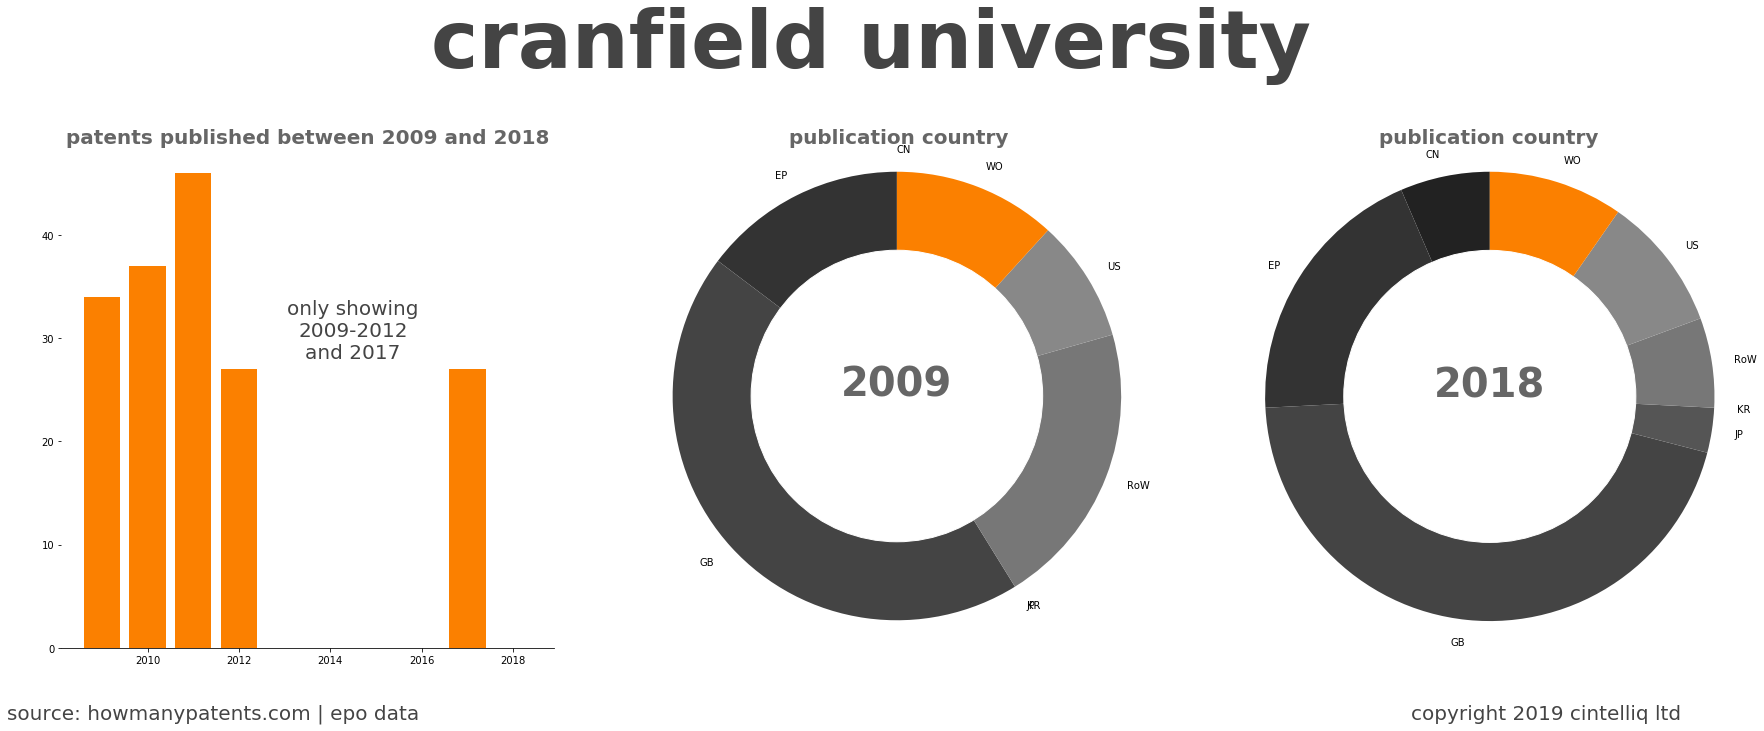 summary of patents for Cranfield University